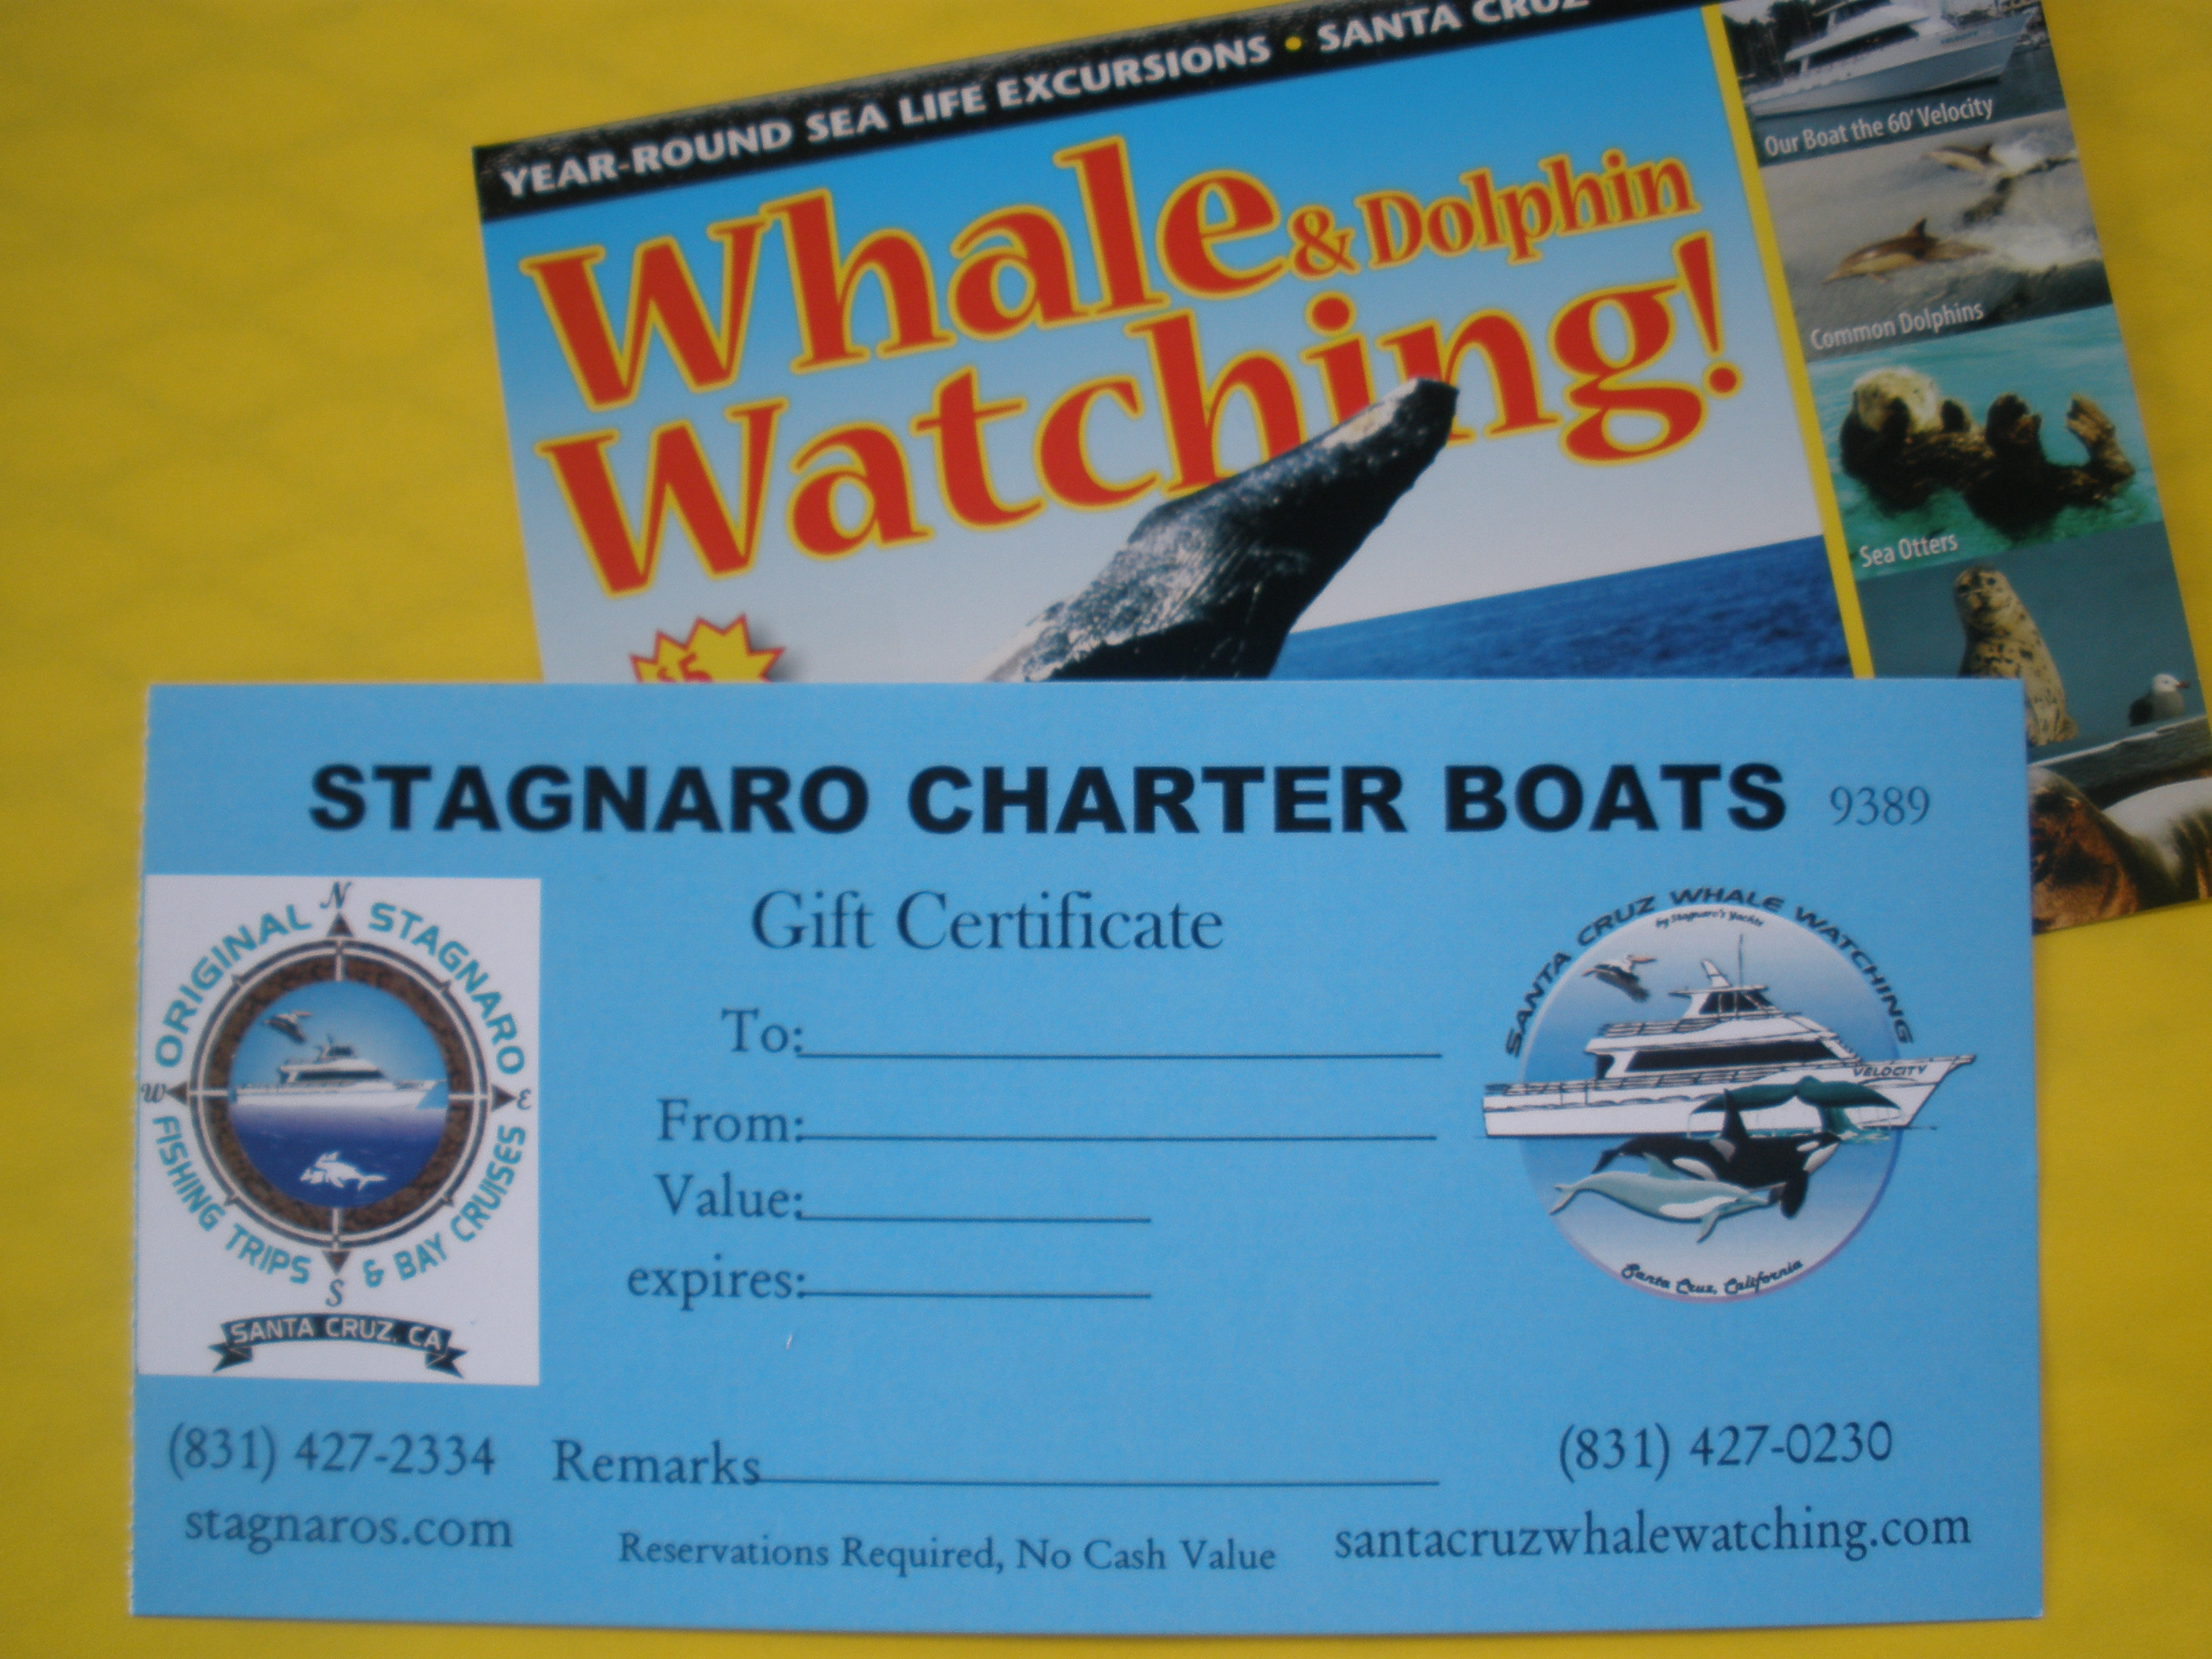 Gift Certificates while Whale Watching in Monterey Bay California with Stagnaro Charters